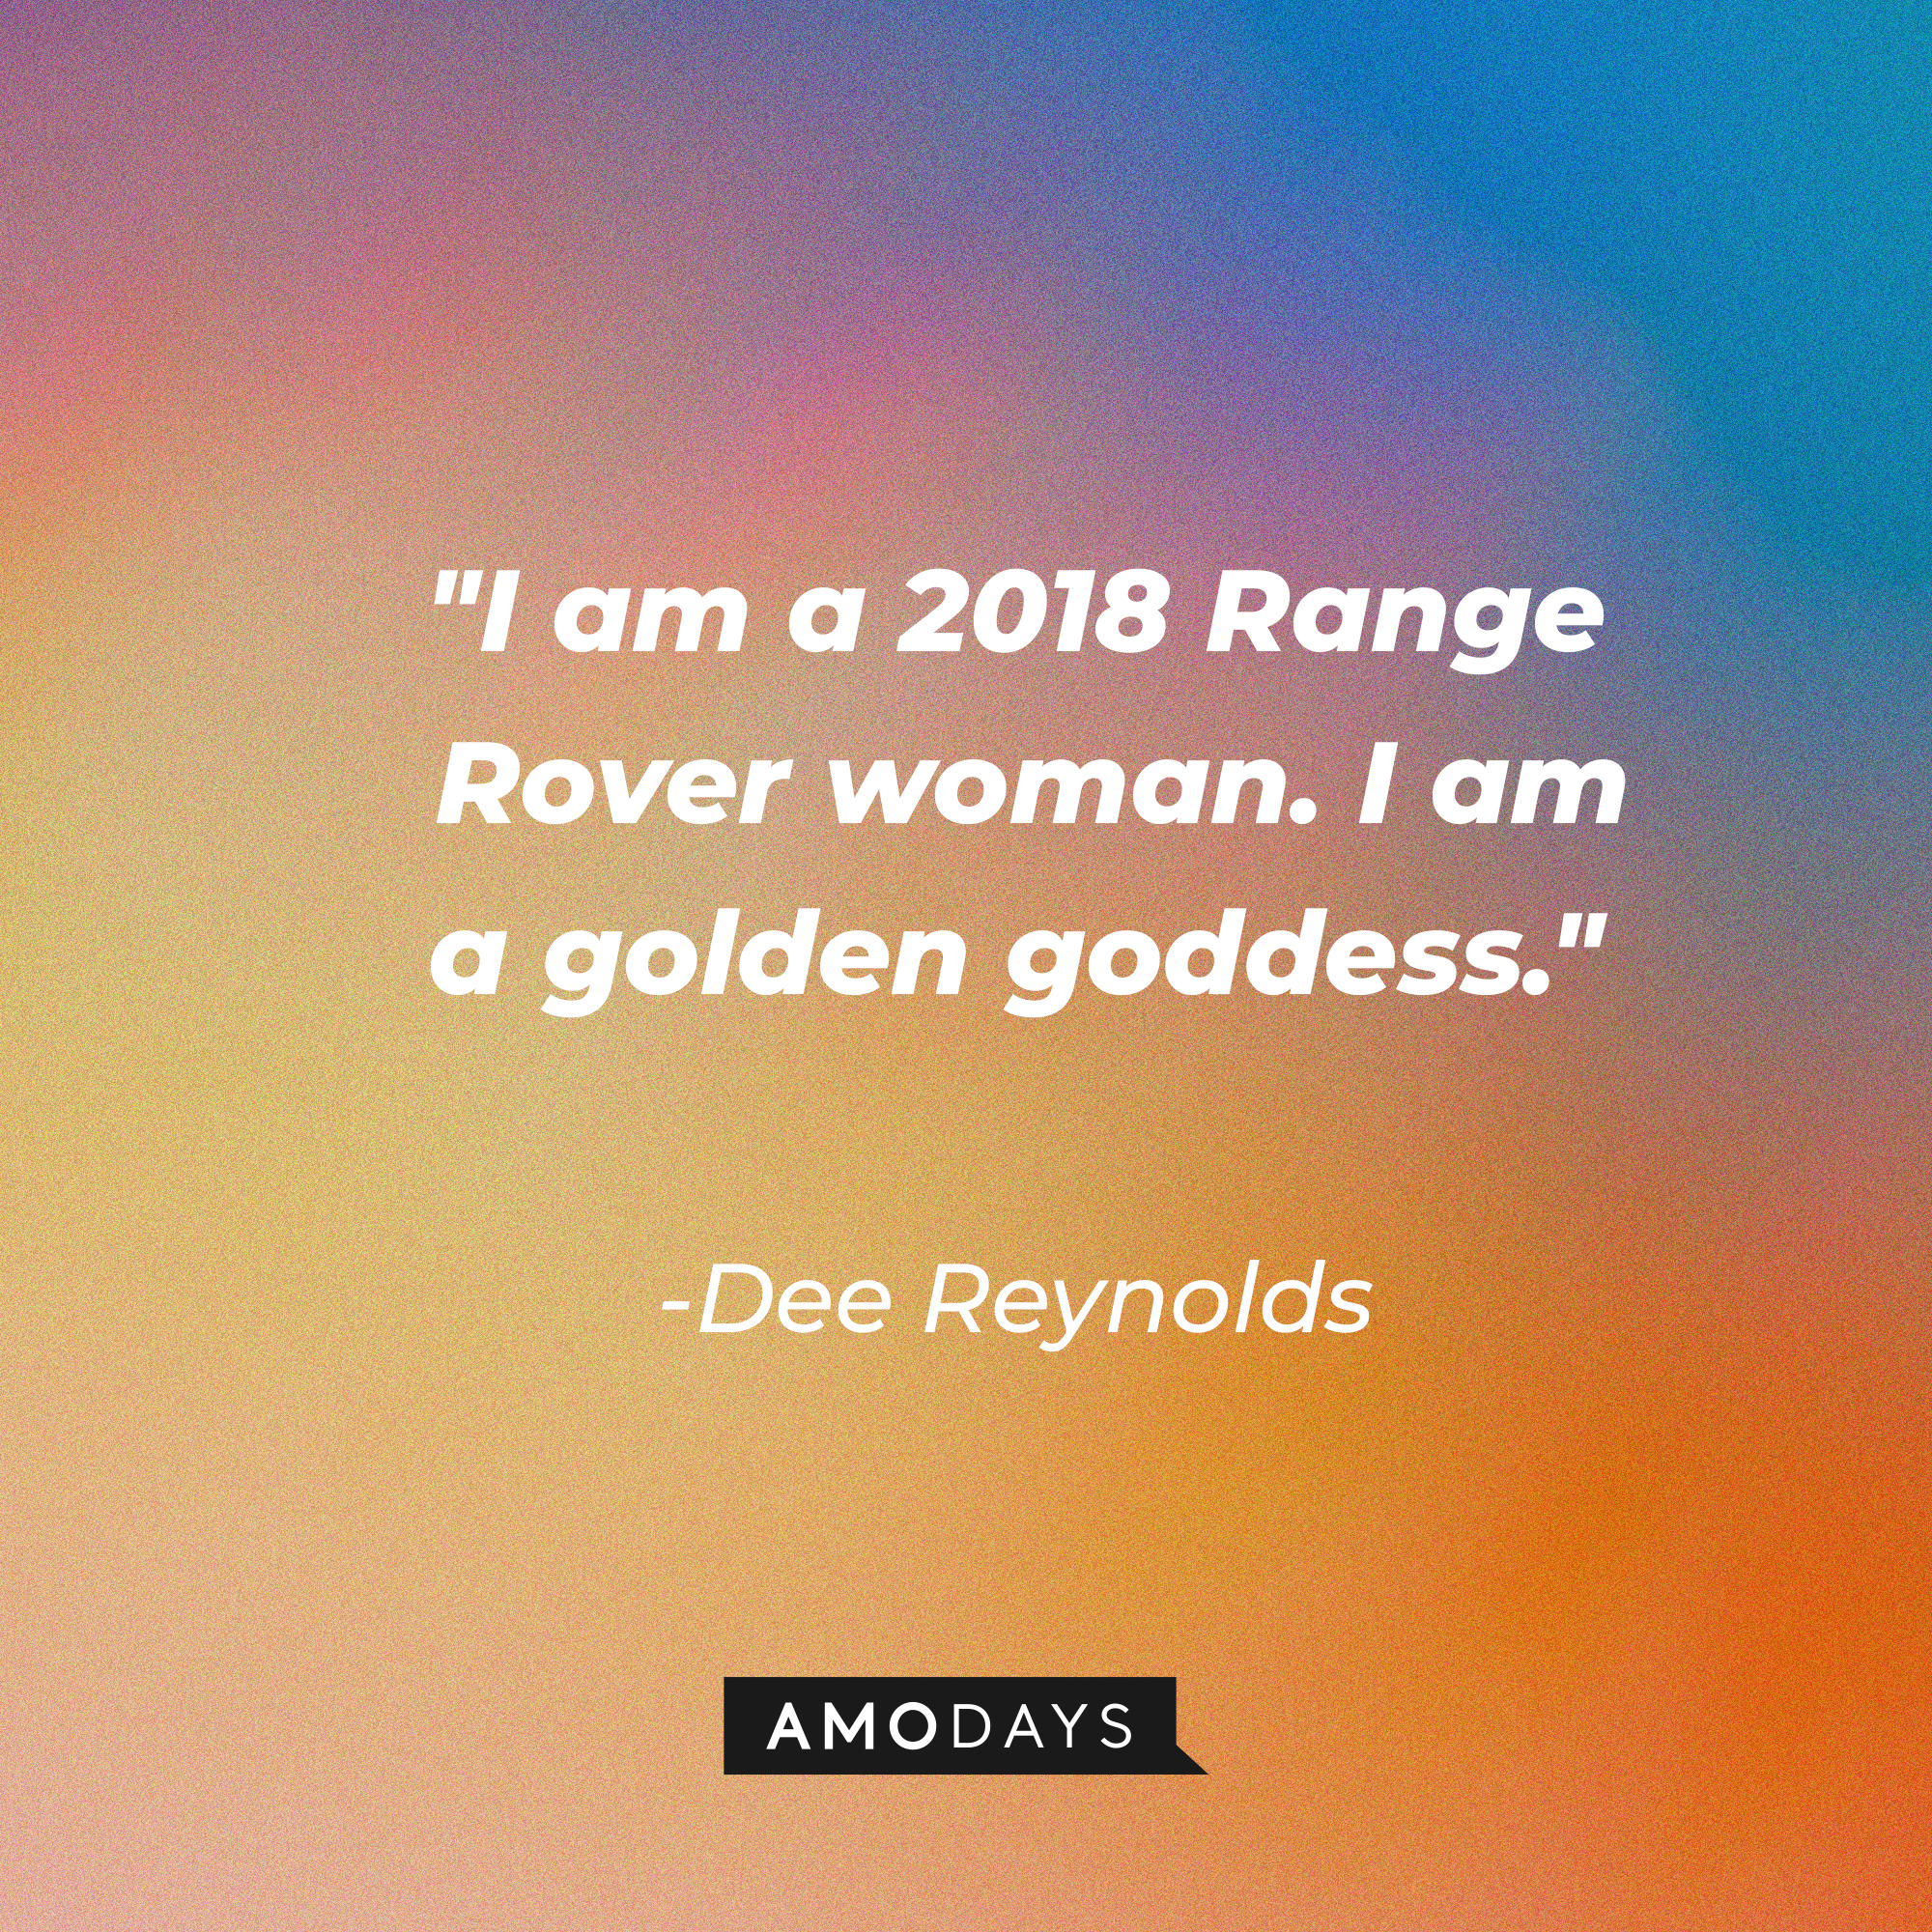 A photo with the quote, "I am a 2018 Range Rover woman. I am a golden goddess." | Source: Amodays